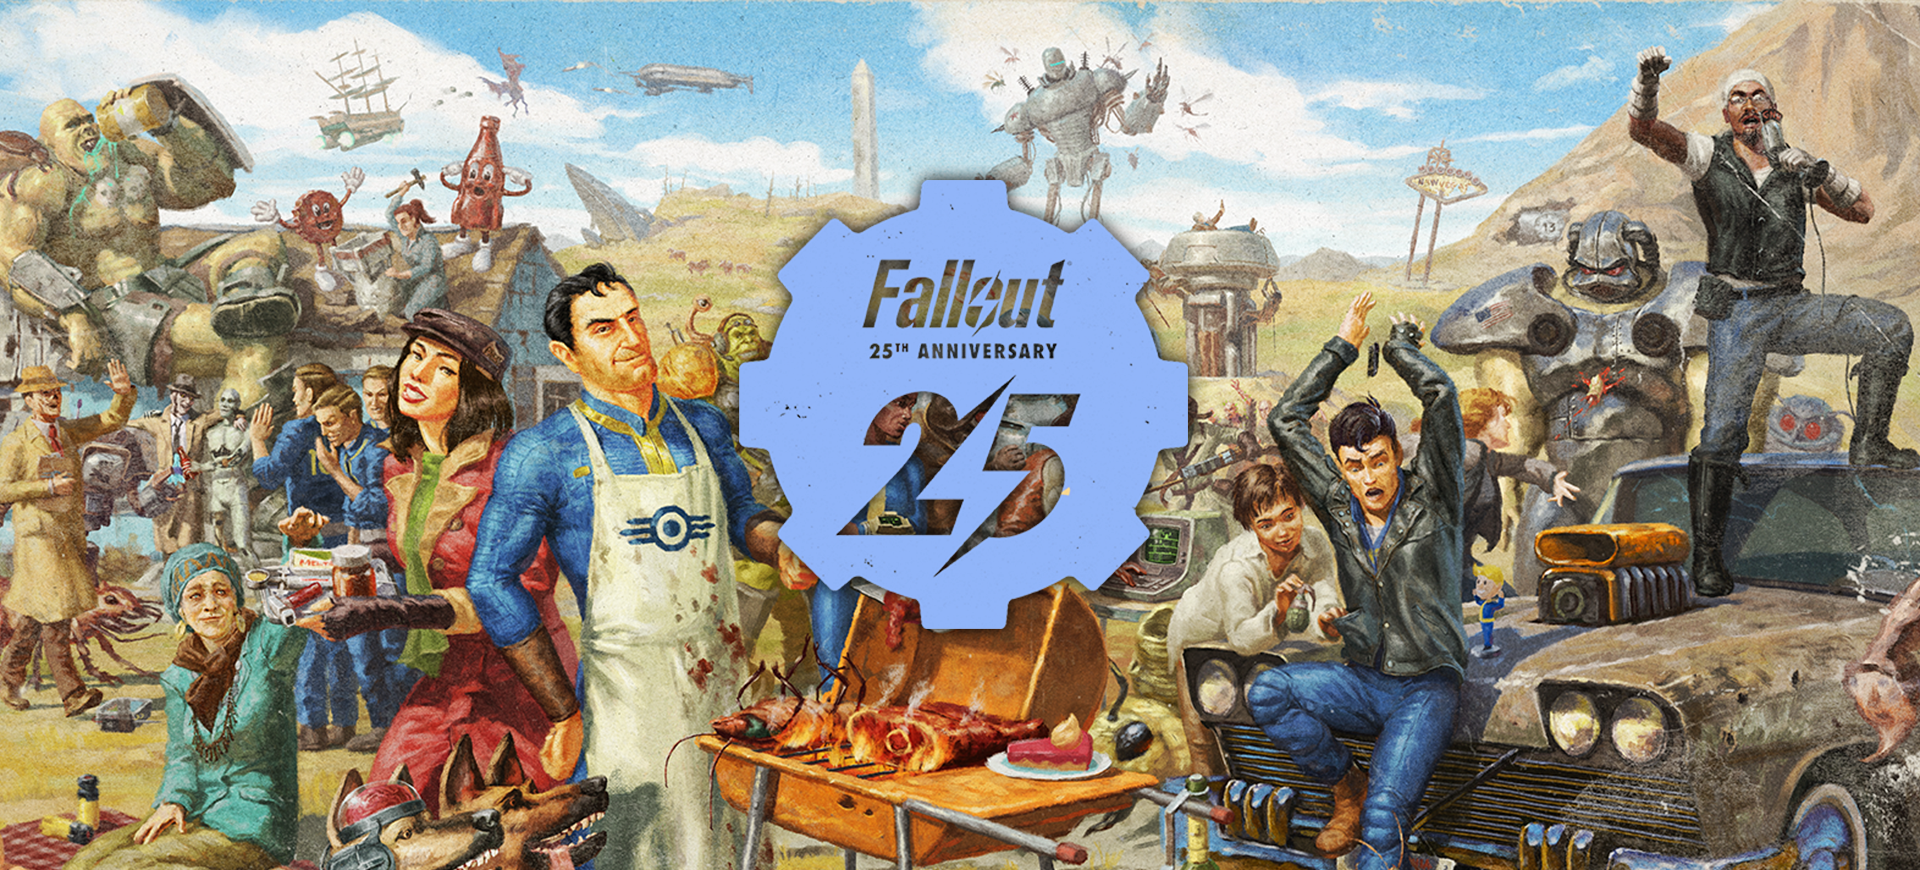 Bethesda fallout 76 on steam фото 82